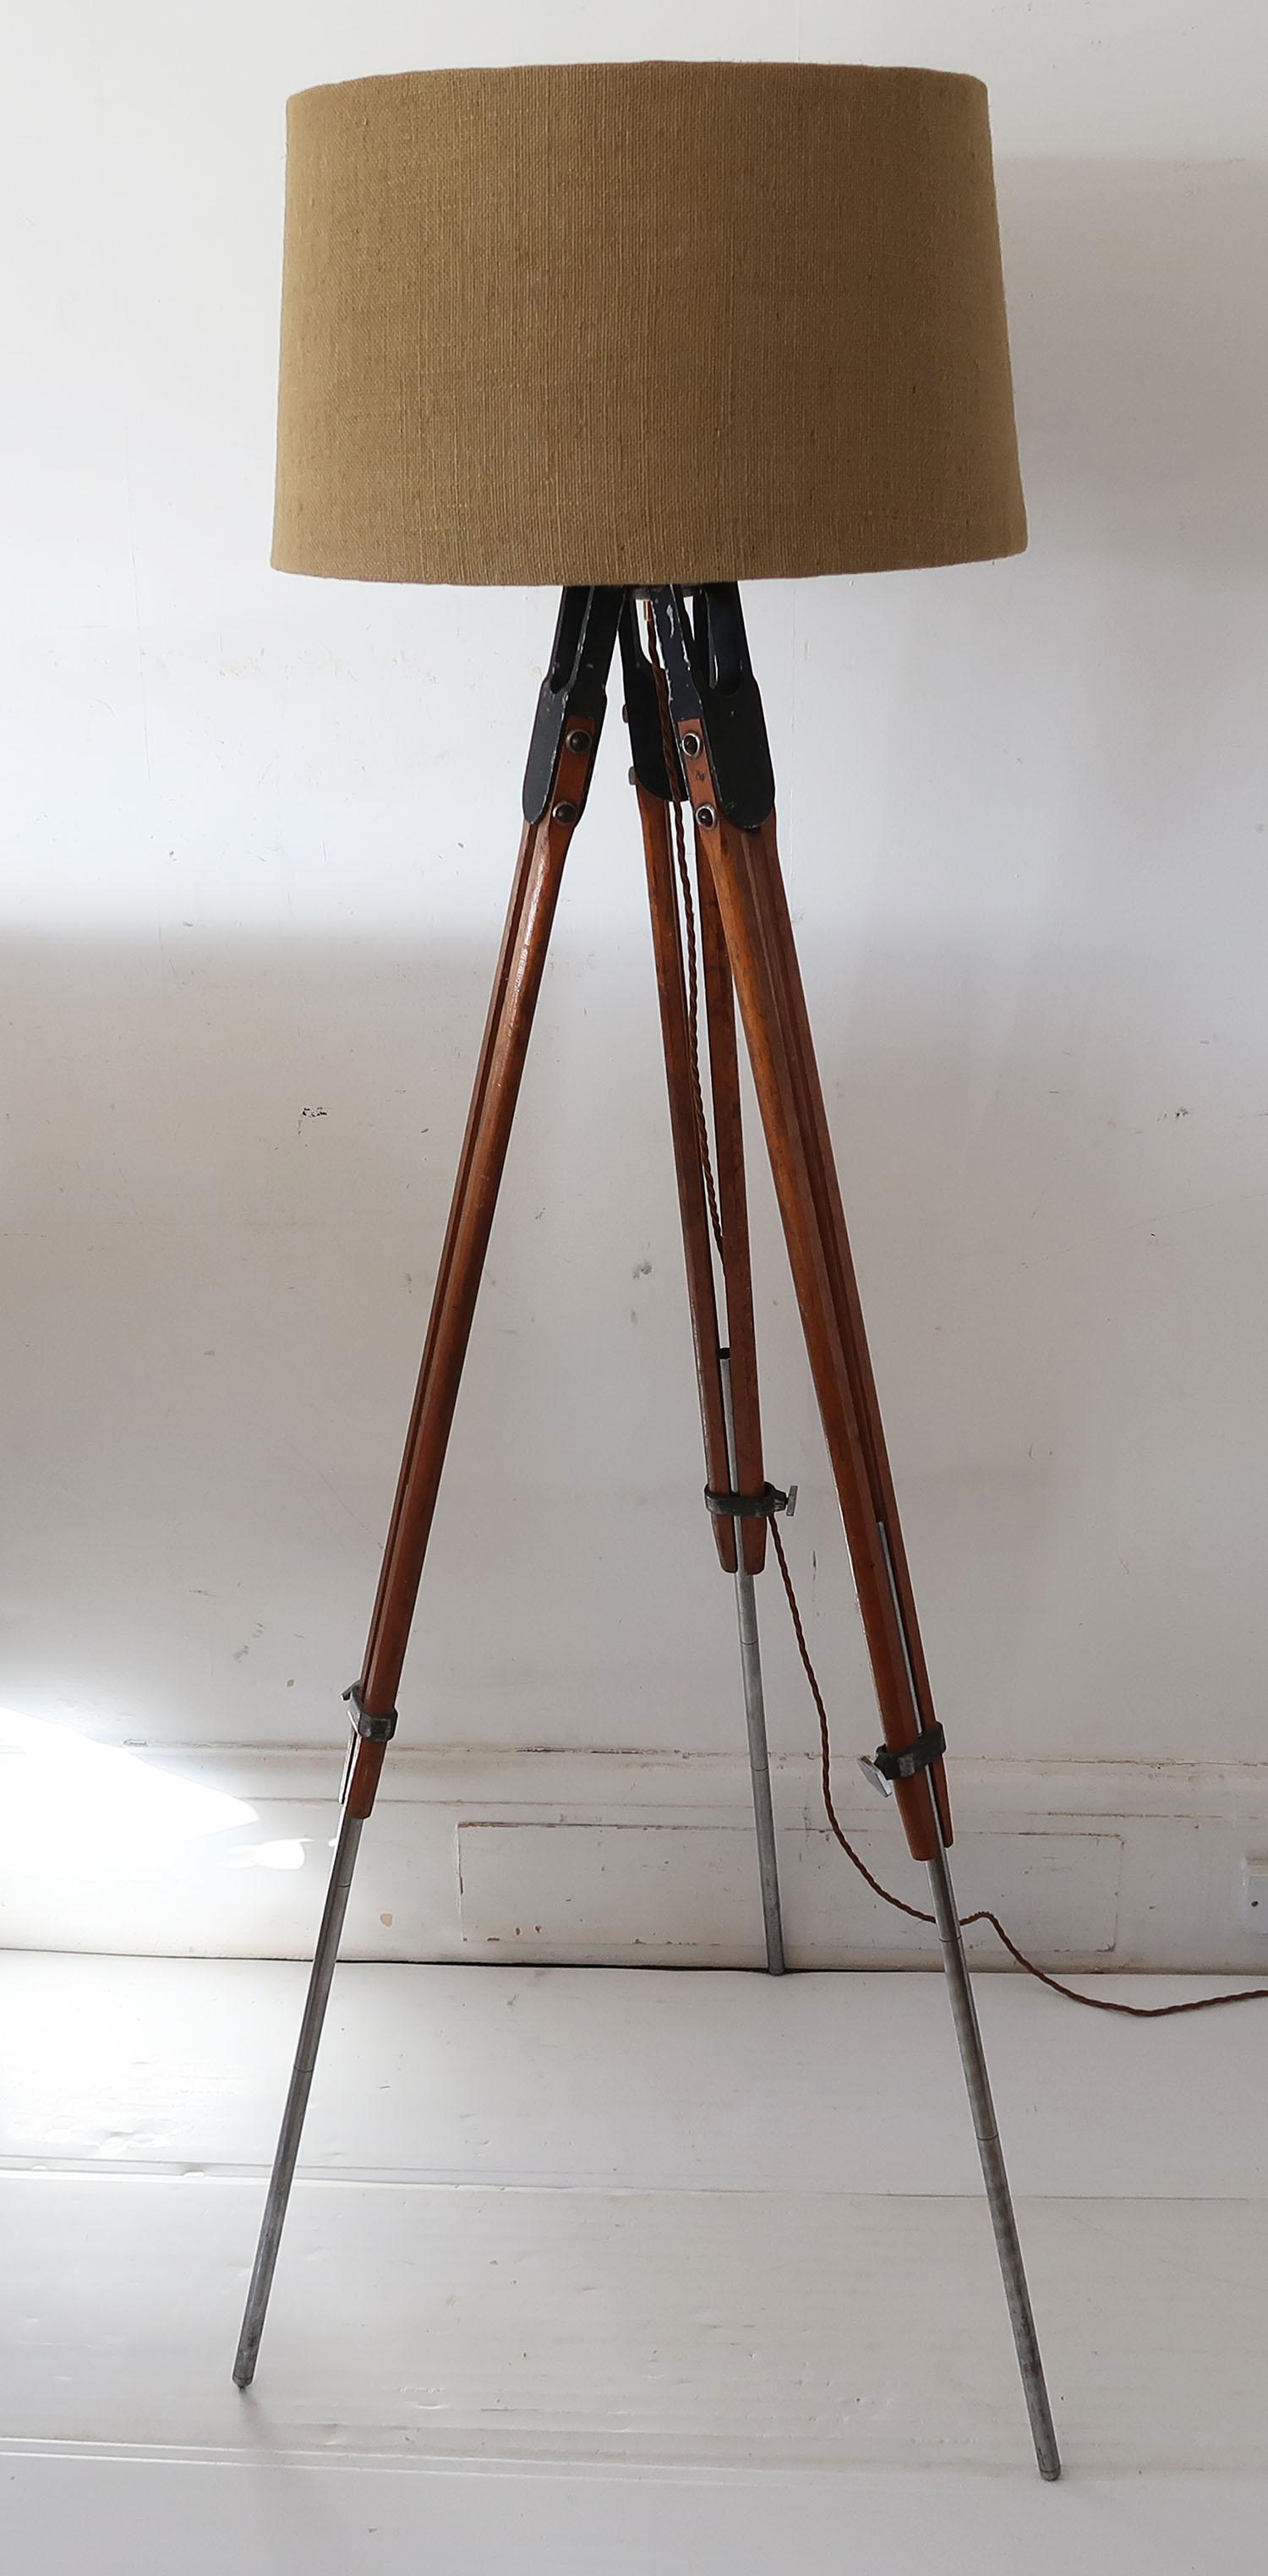 Originally a surveyors tripod. The tubular metal legs are adjustable.

The piece has been converted to a light fitting.

The height measurement I give below relates to the position in the picture.

It has been wired to UK standards. The burlap shade